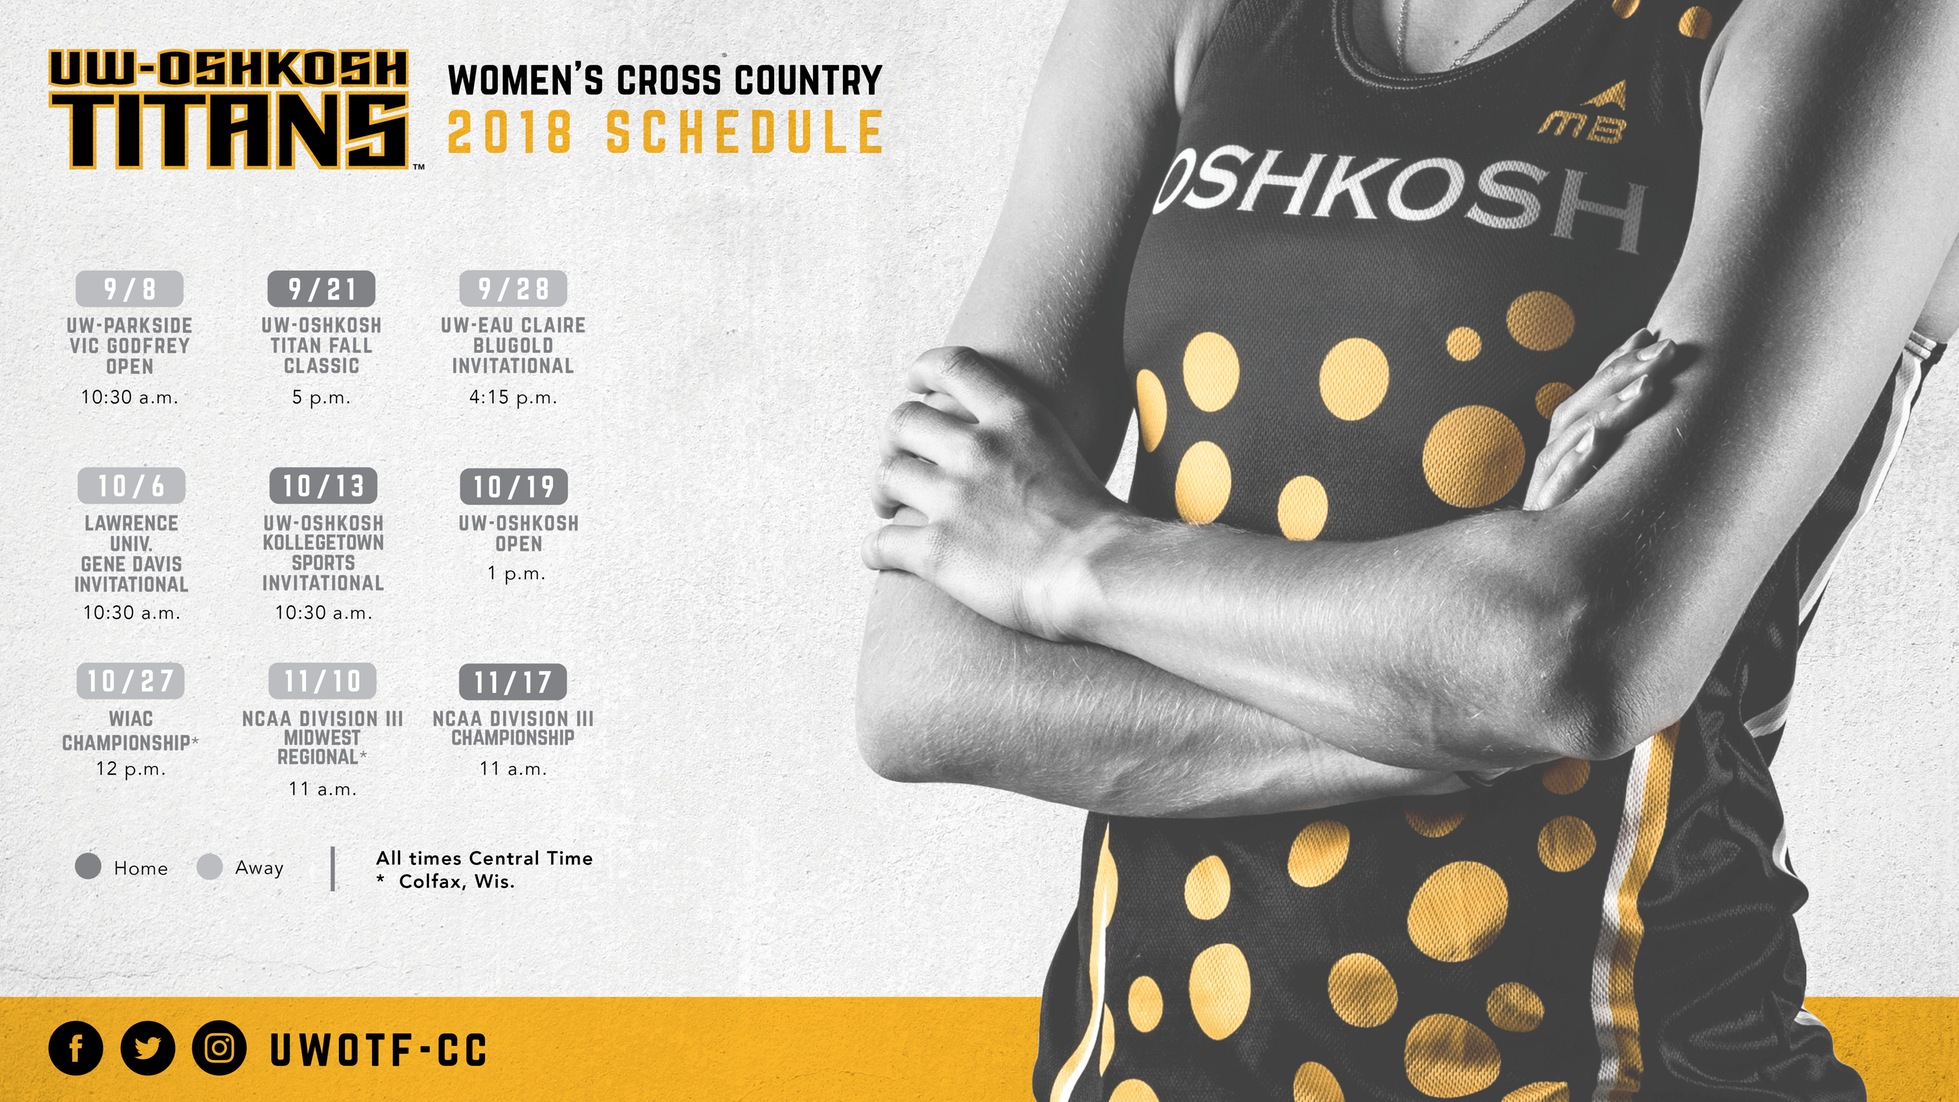 Hosting Of NCAA Championship Highlights Titans’ Women’s Cross Country Schedule